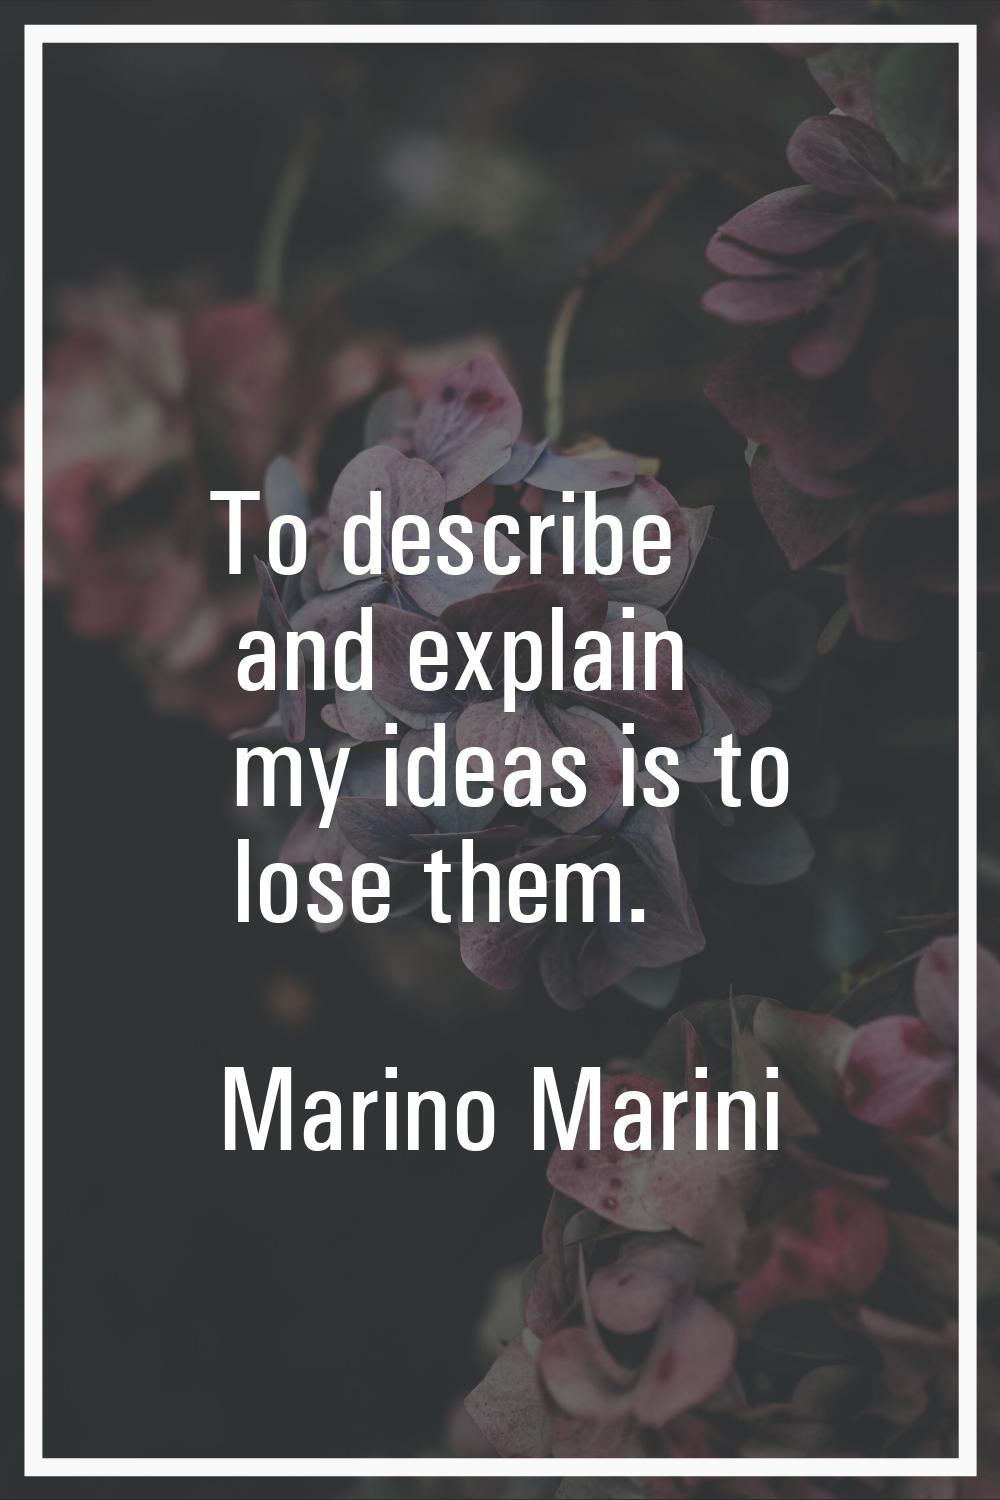 To describe and explain my ideas is to lose them.